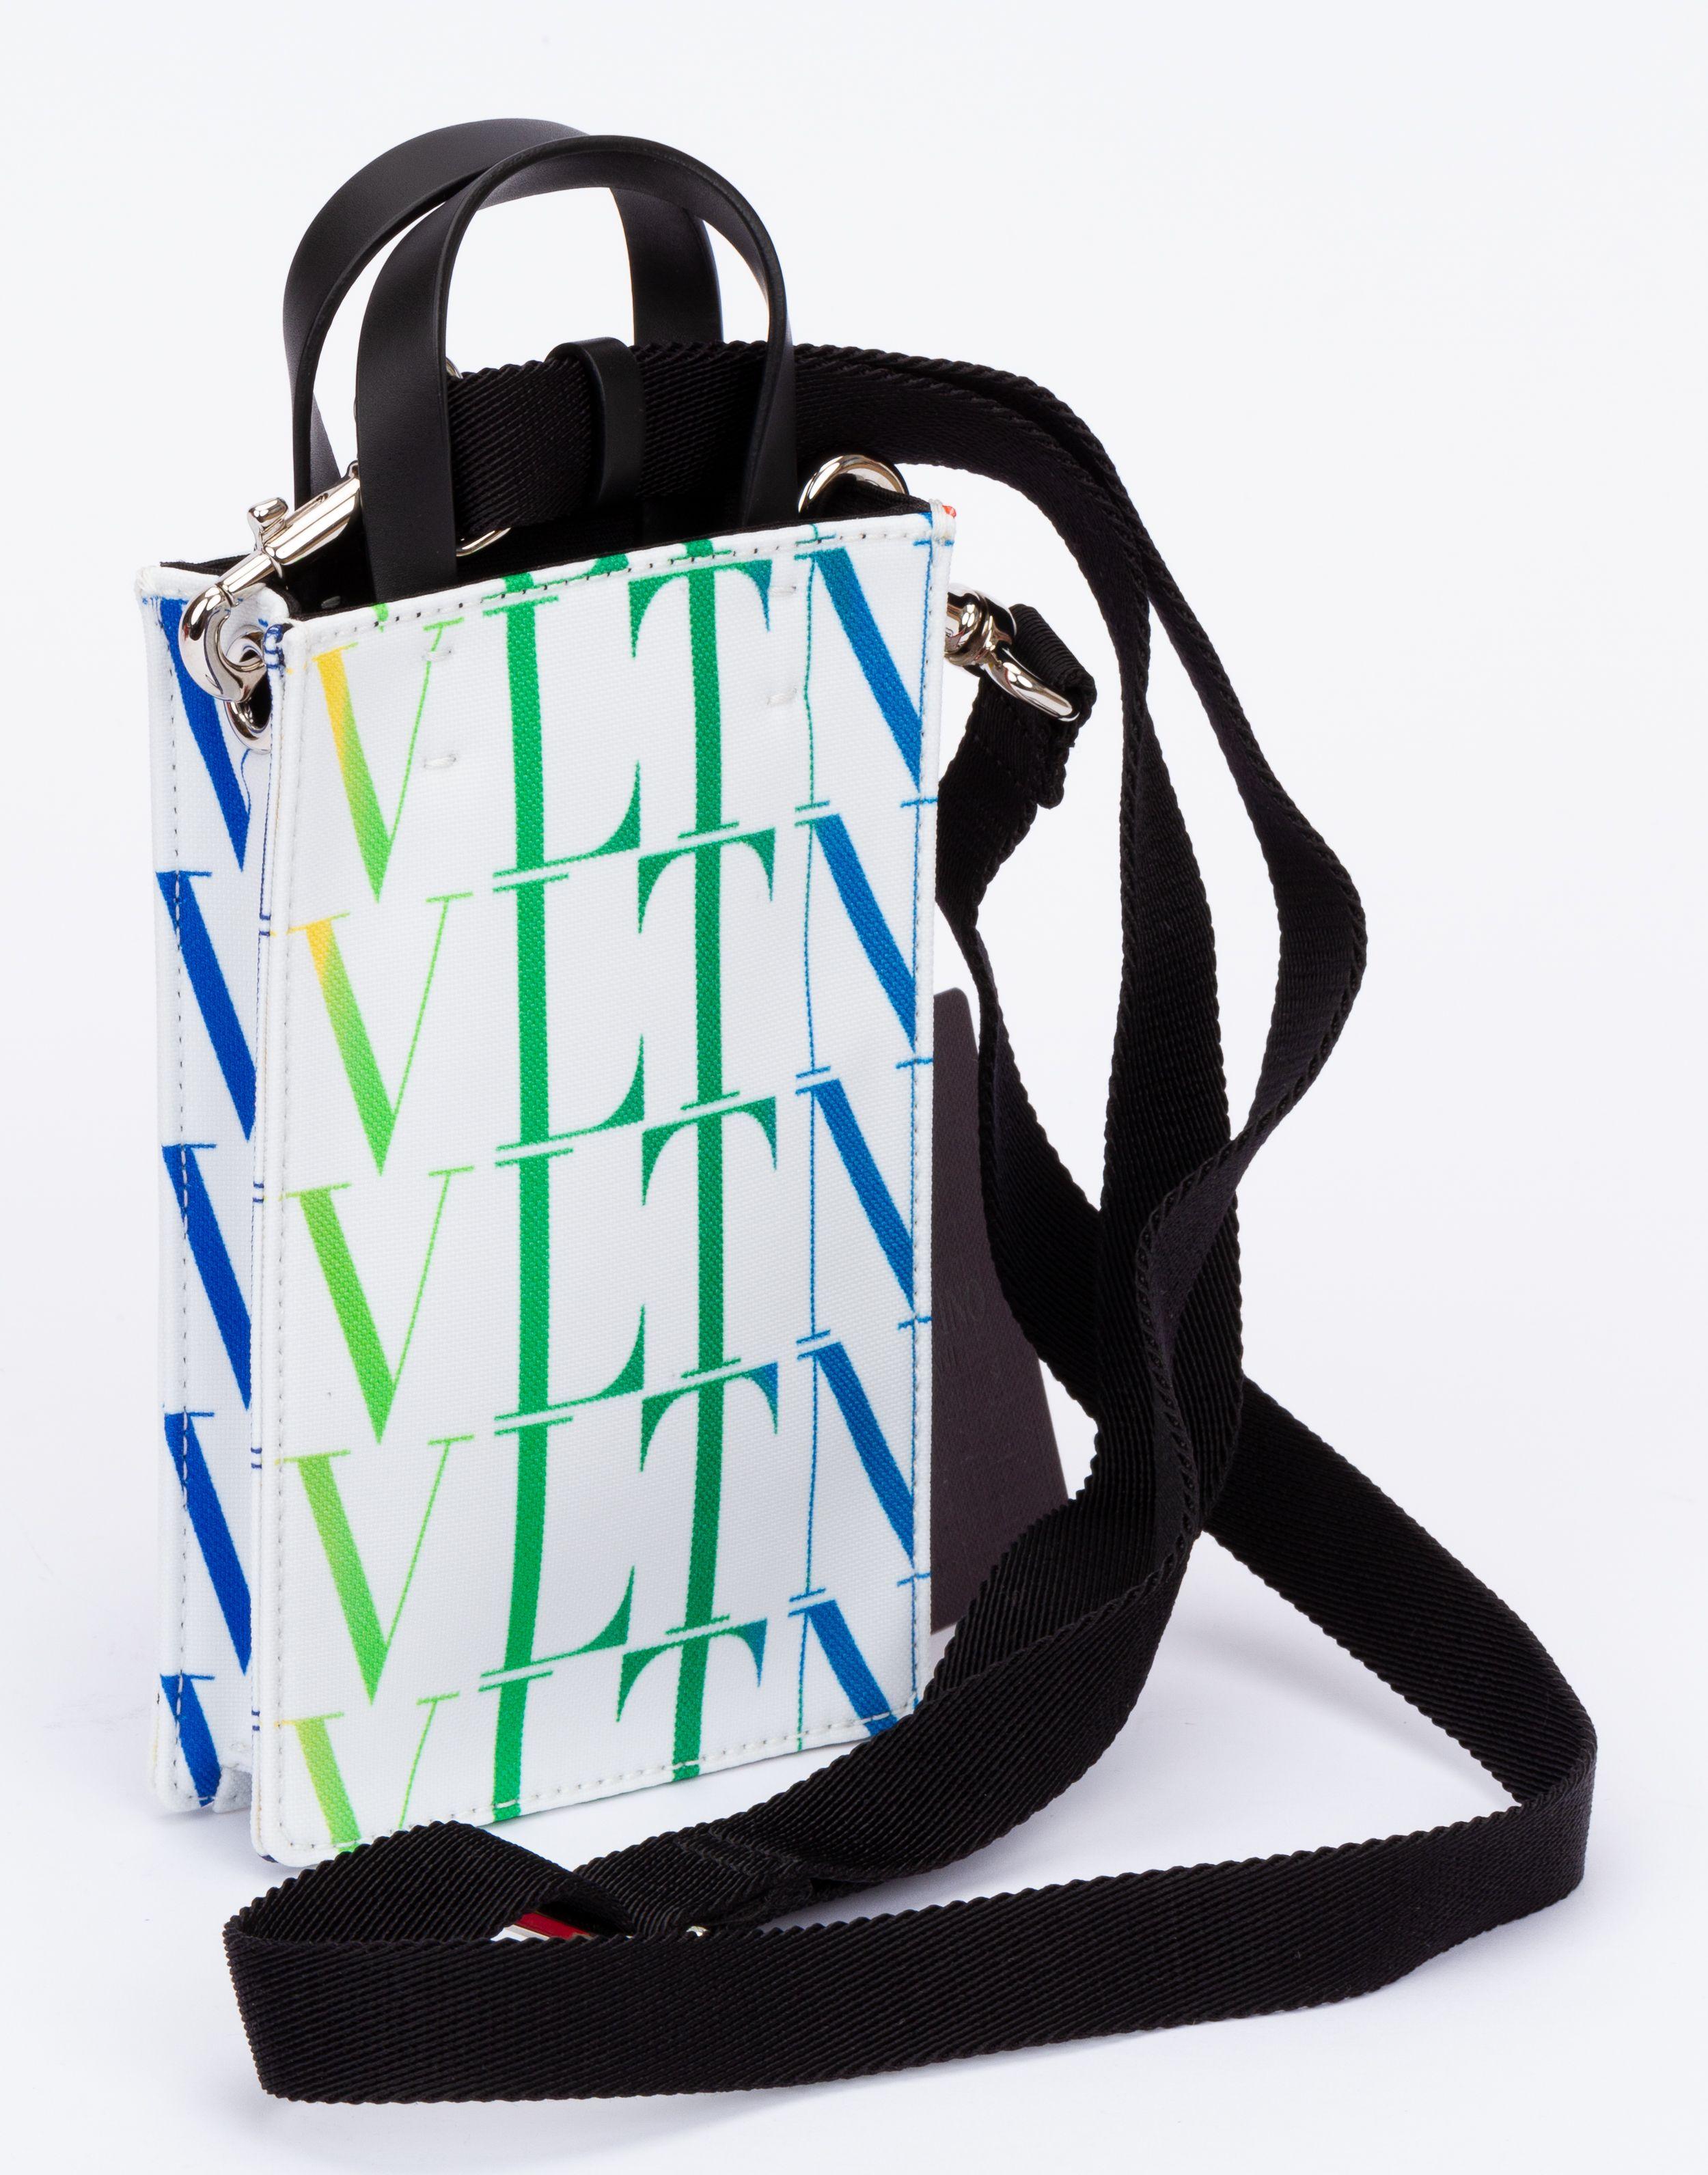 Valentino bag made out of leather with the logo printed on it which fades from green to blue. The bag comes with a adjustable and detachable shoulder strap (drop up to 26